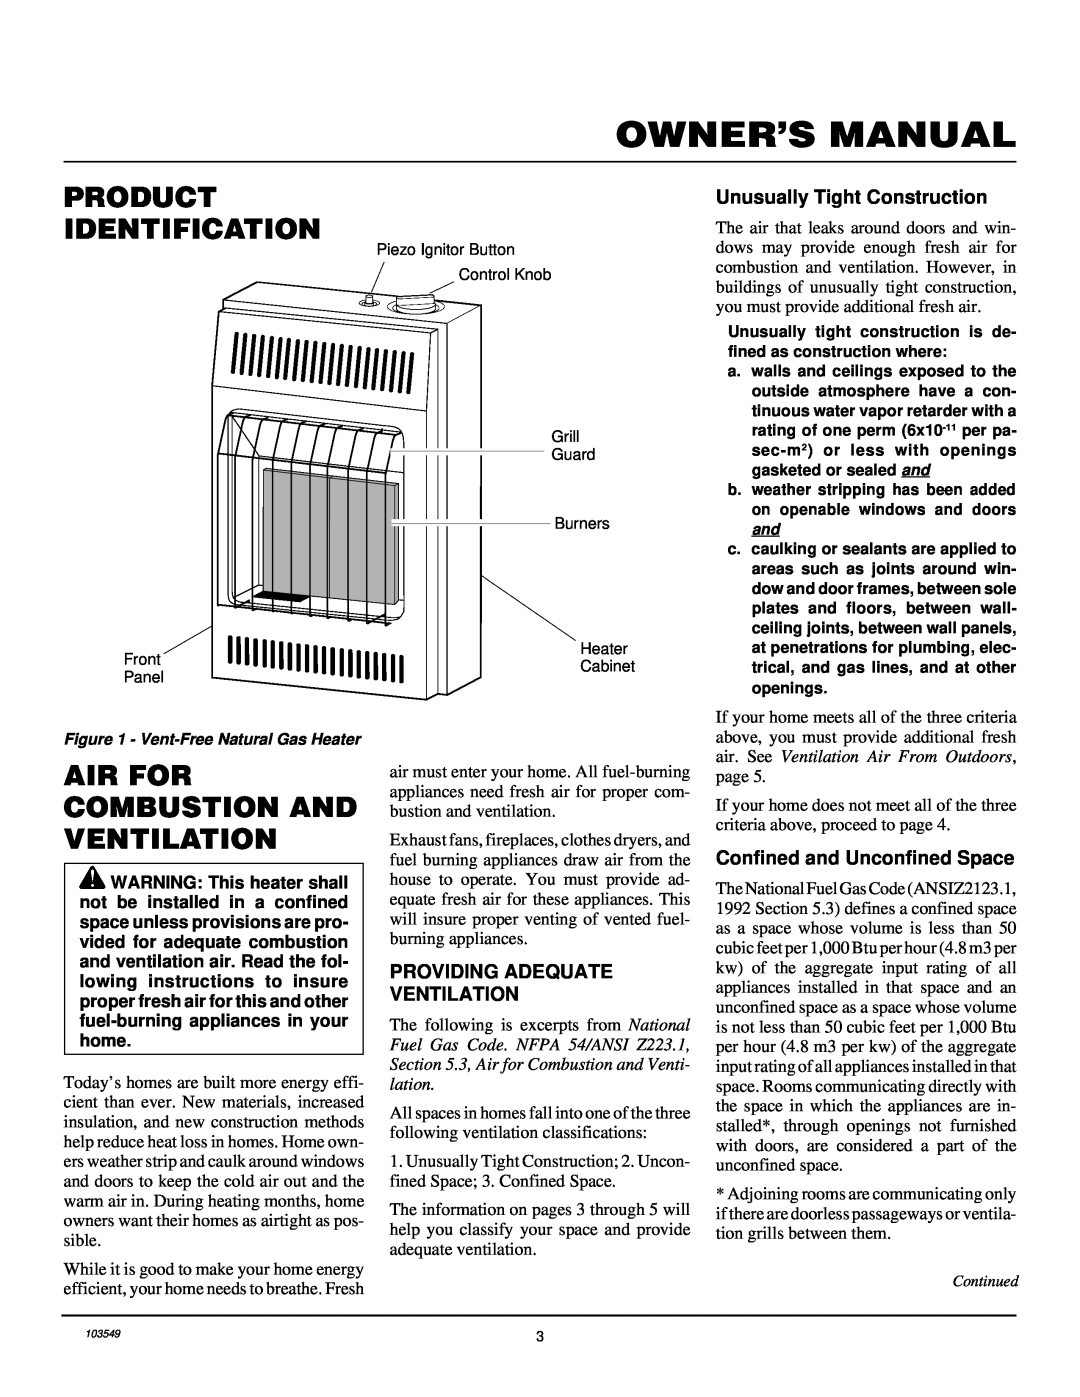 Desa CGN10RL installation manual Product Identification, Air For Combustion And Ventilation, Unusually Tight Construction 